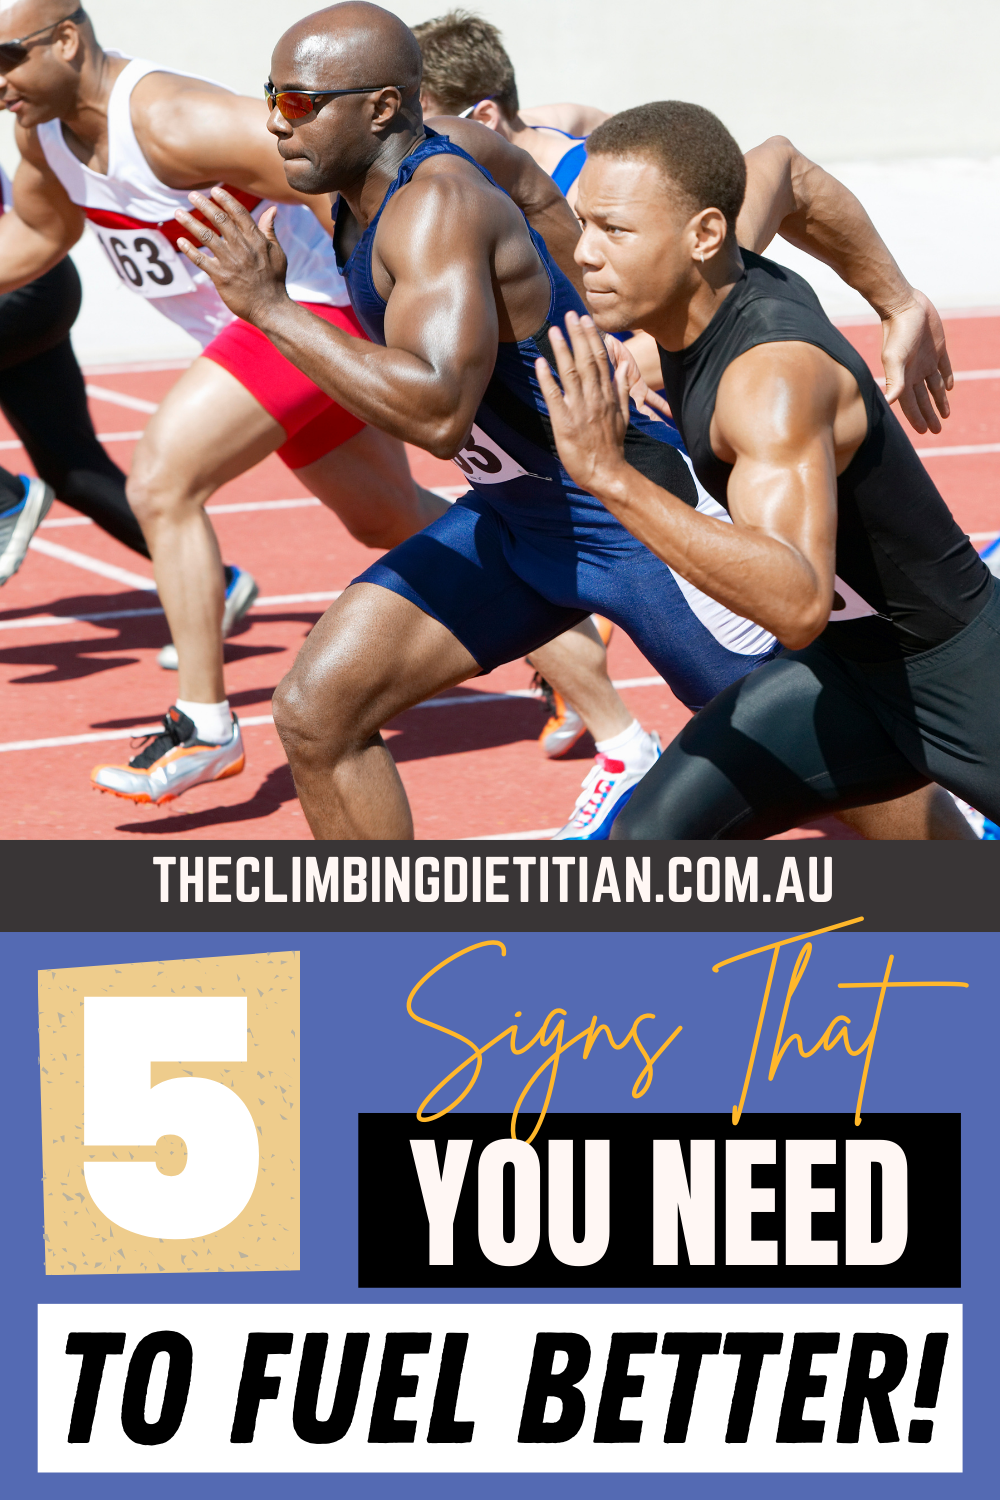 5 SIGNS YOU NEED TO FUEL BETTER AS A SPORTING ATHLETE